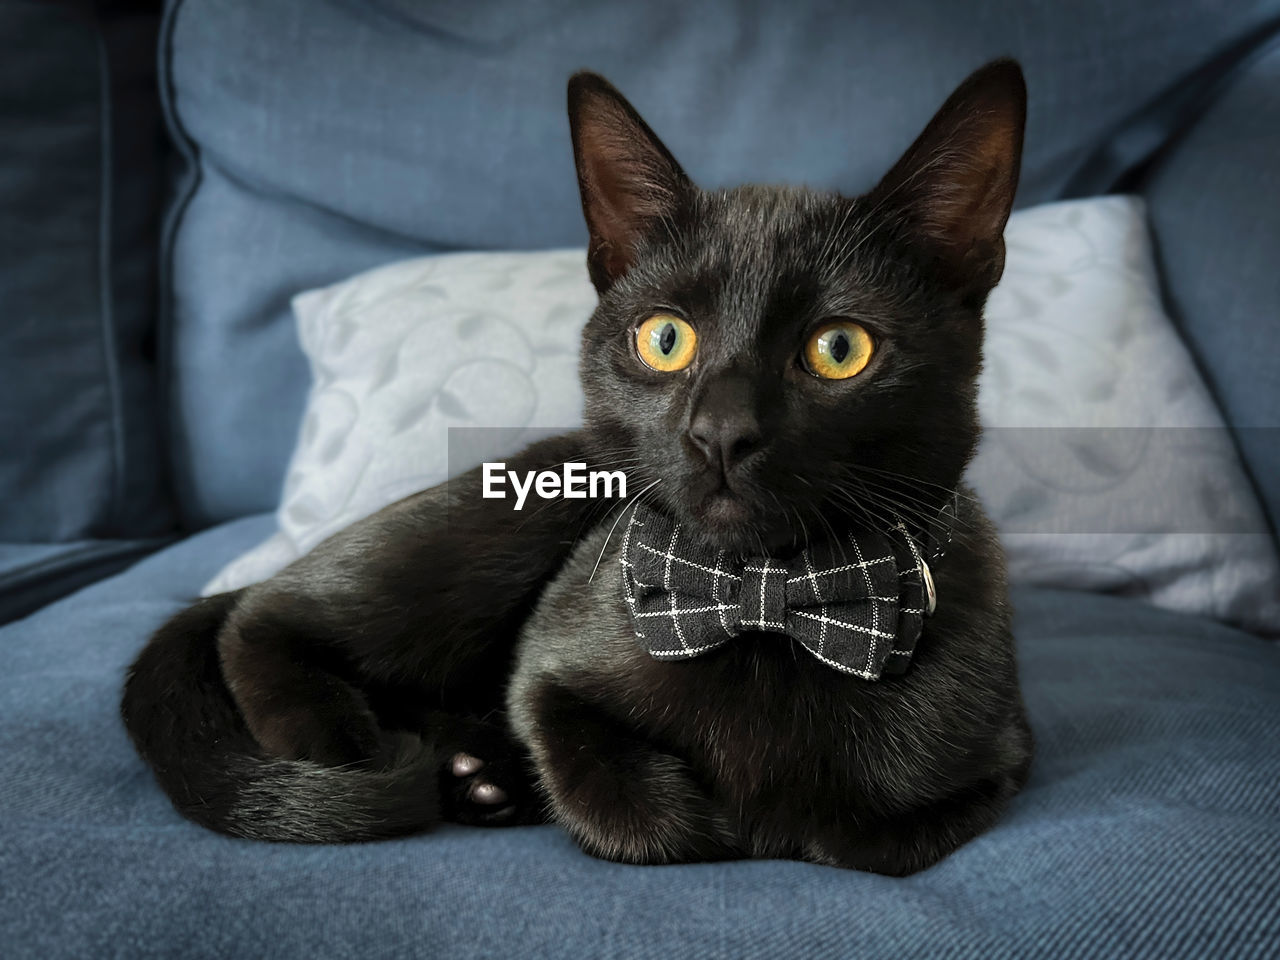 Close-up portrait of a black cat wearing a bow tie